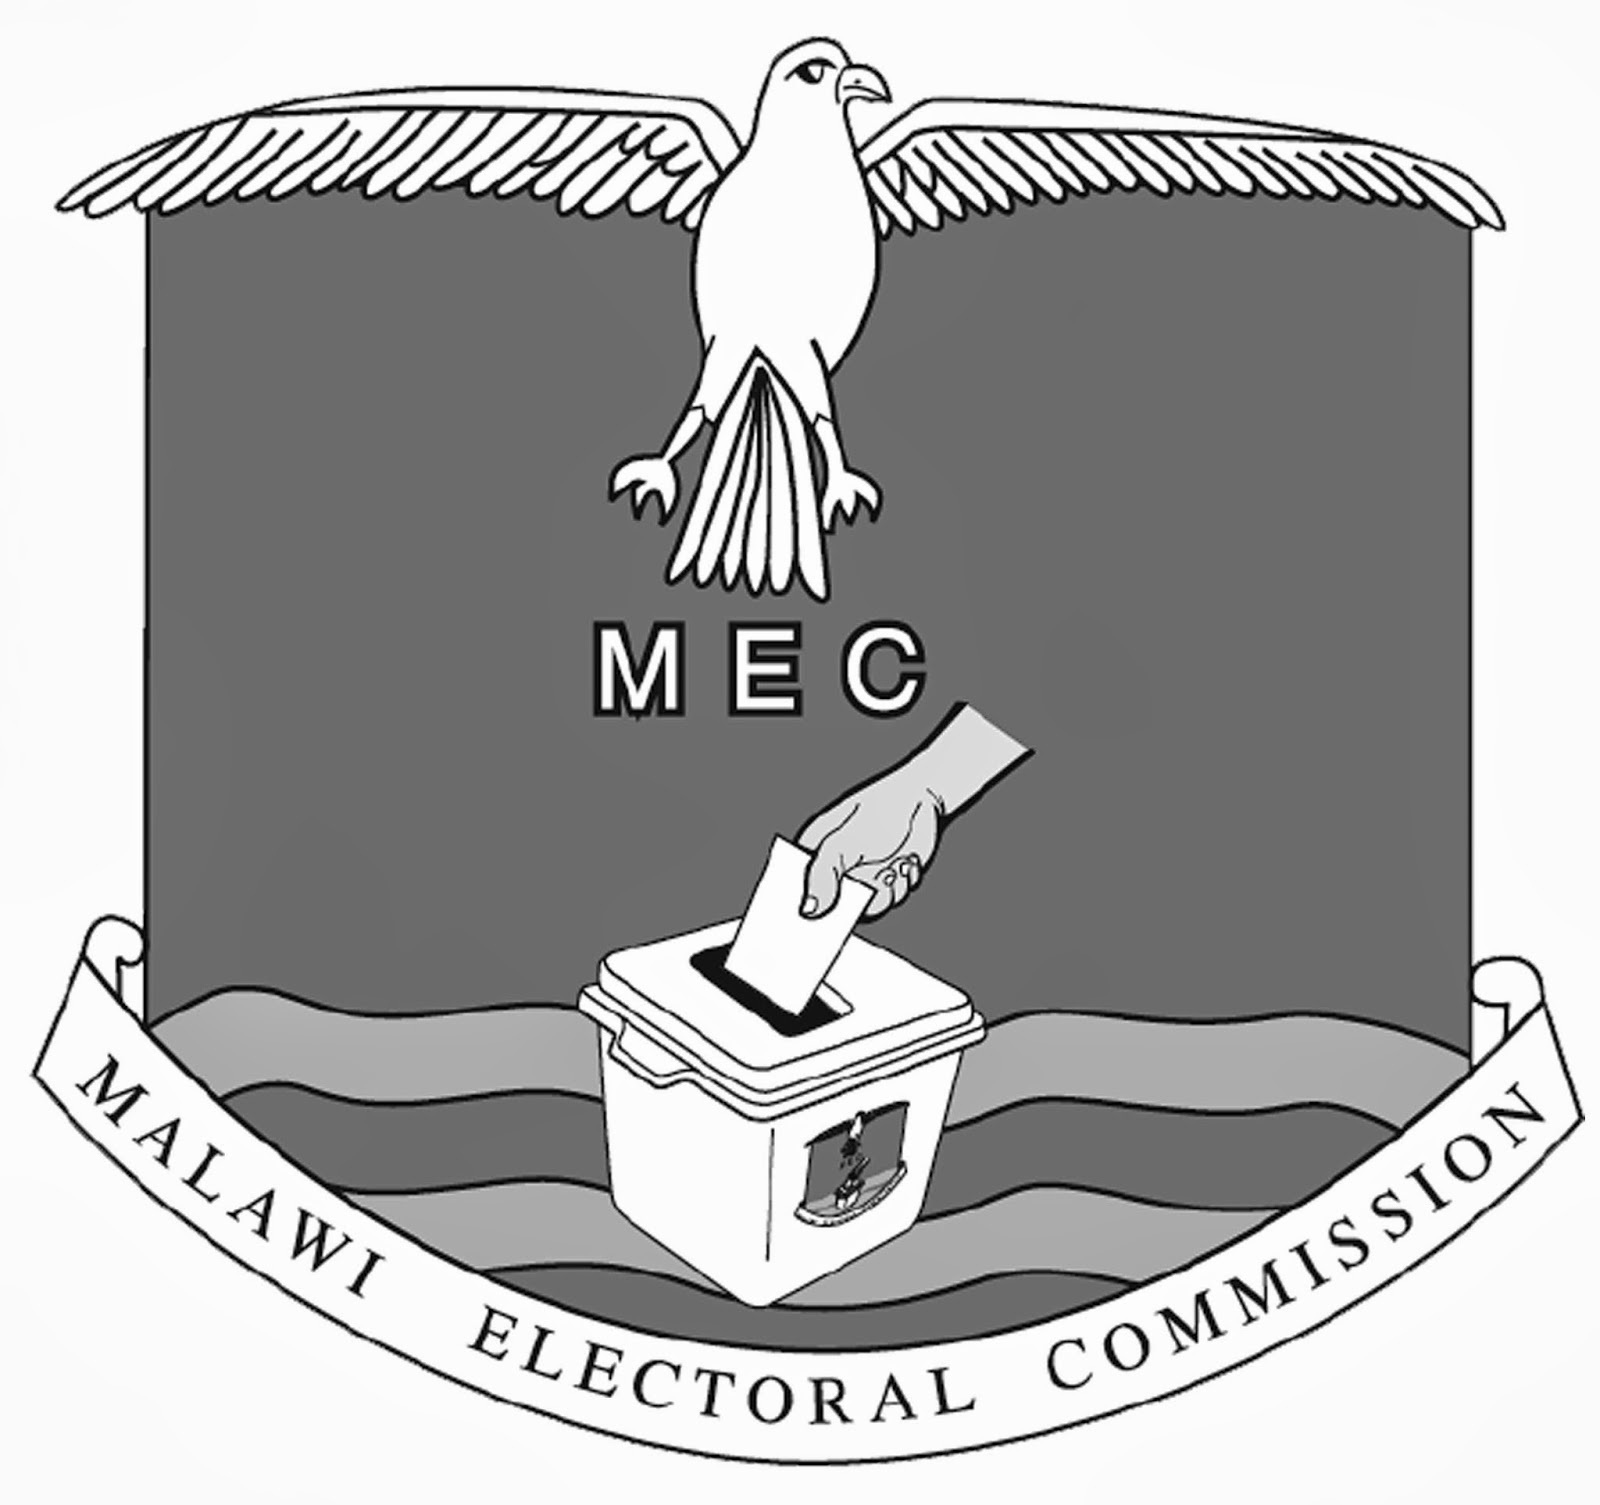 MEC TO DELAY SALARY PAYMENT OF TEMPORARY STAFF